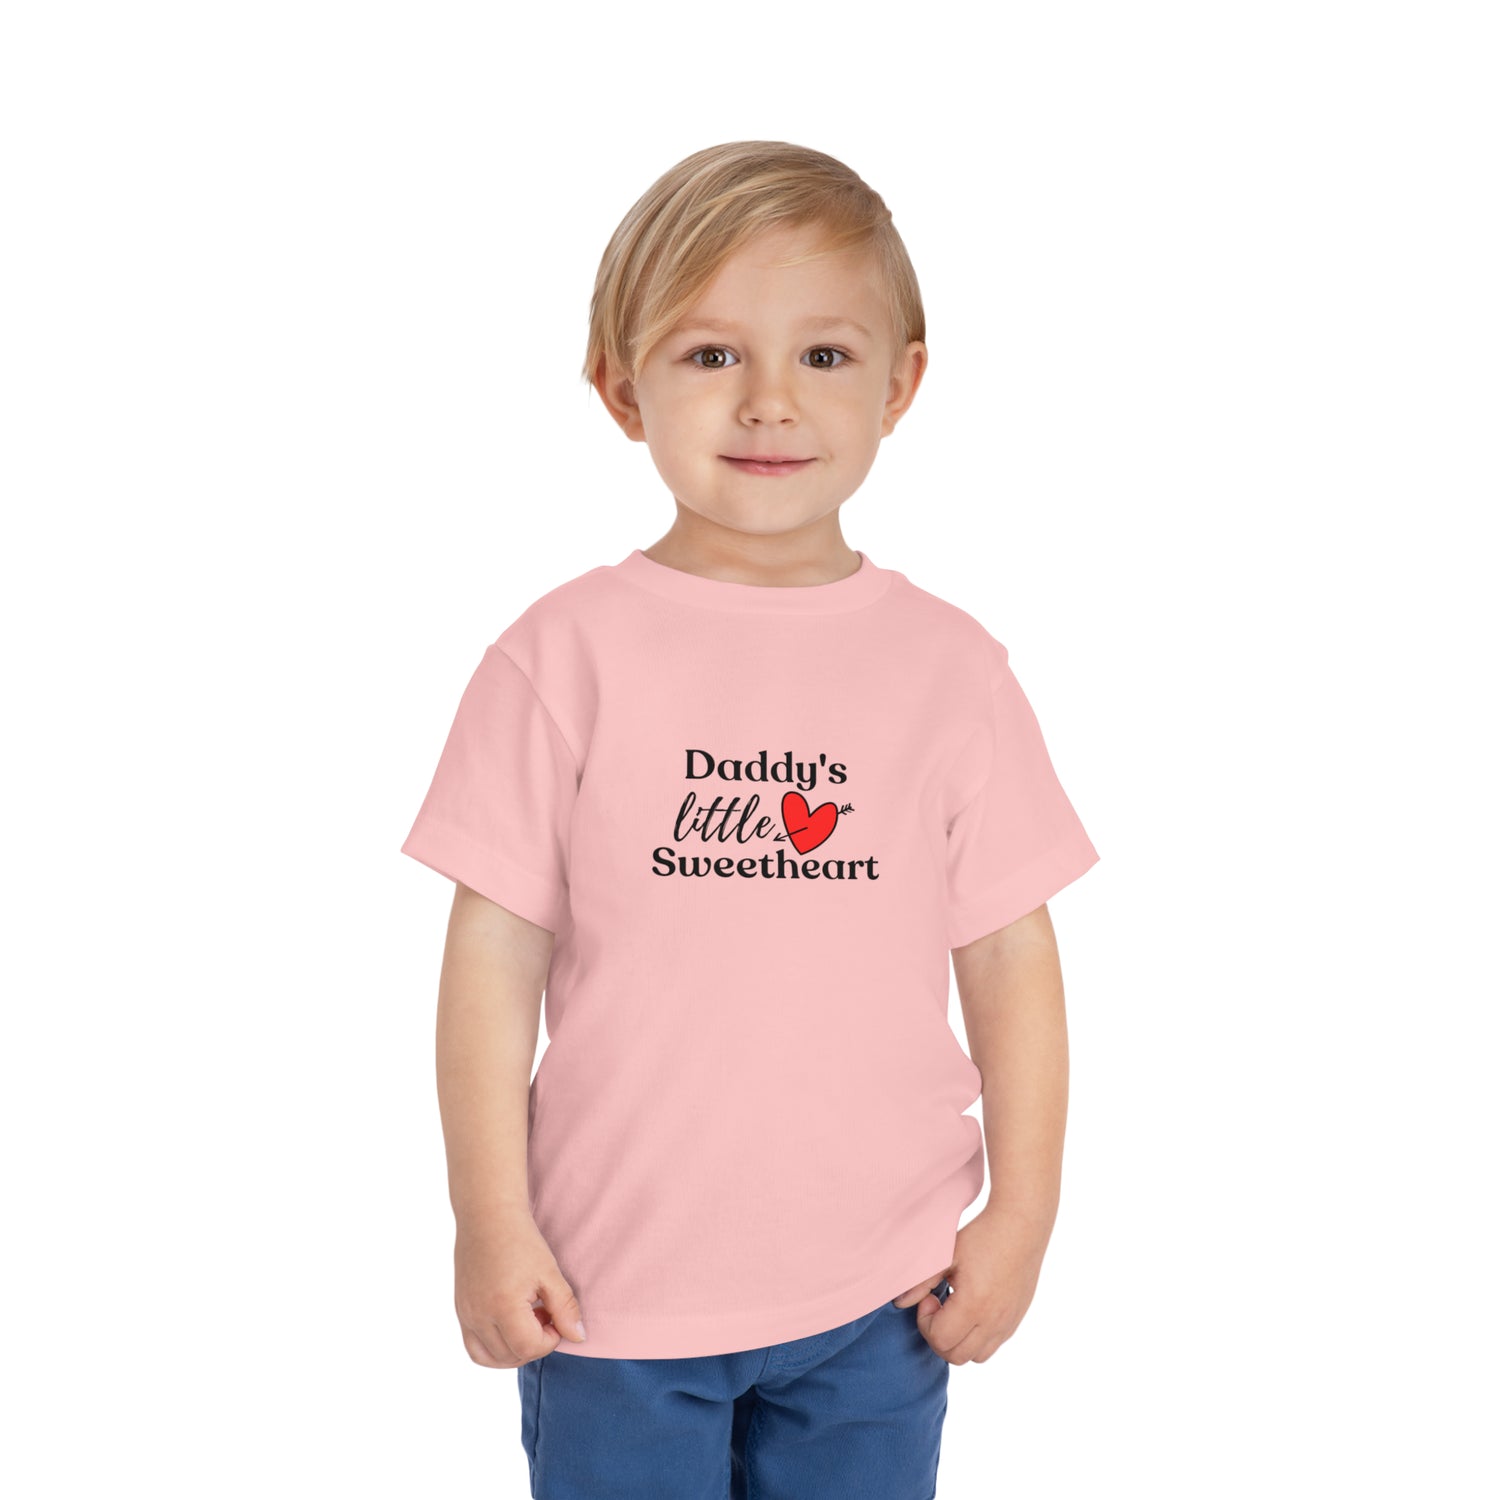 Daddy's Little Sweetheart Toddler Tee